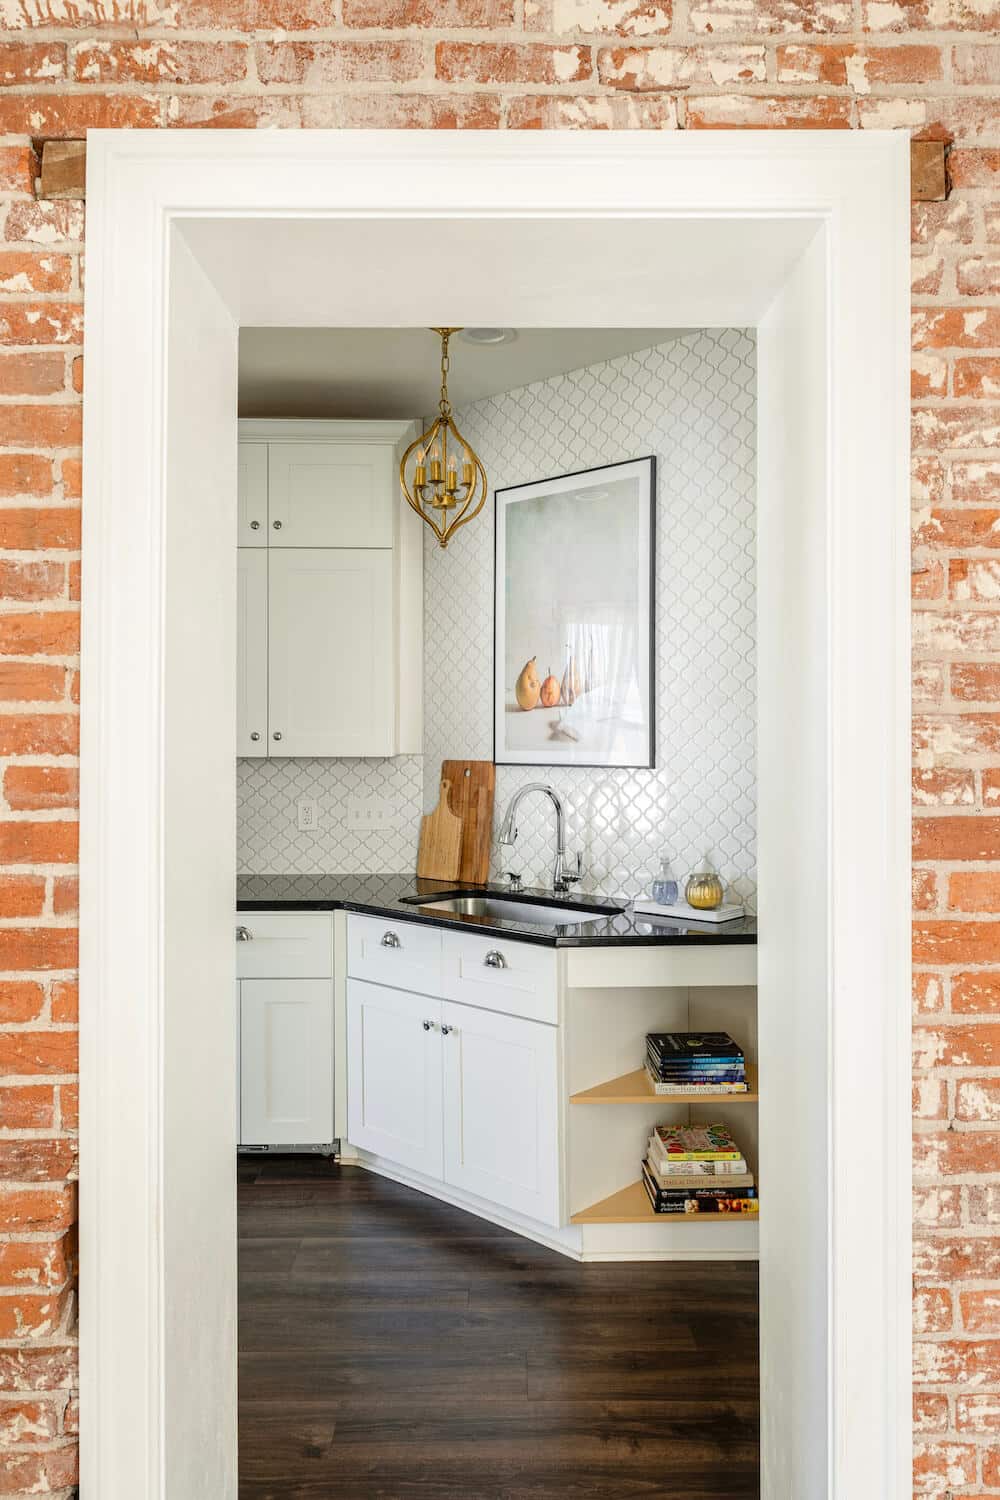 brick wall and kitchen counter endcap with open shelves